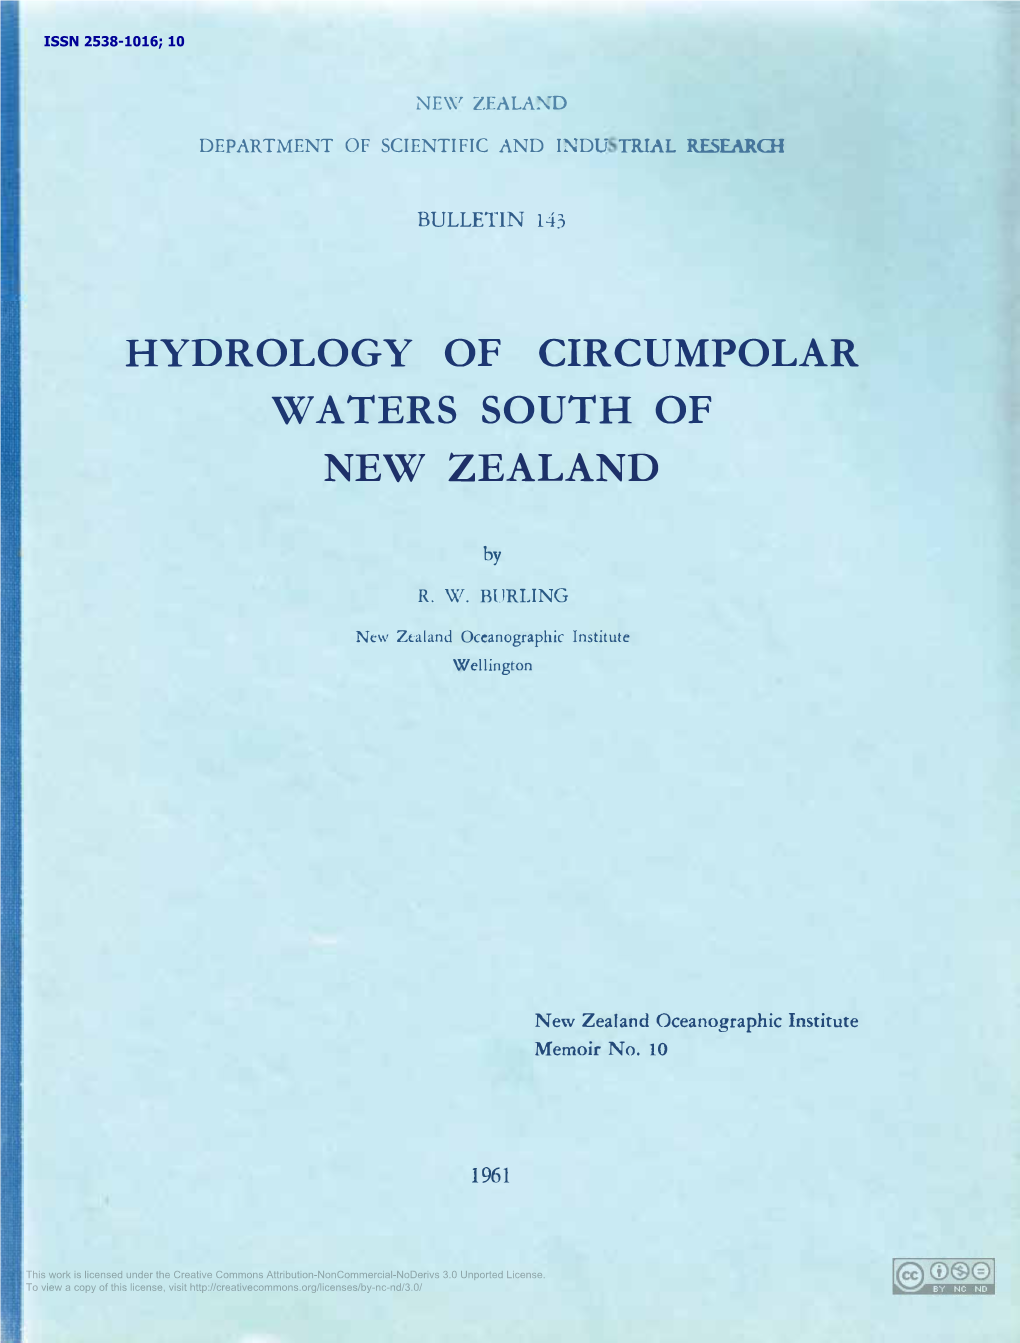 Hydrology of Circumpolar Waters South of New Zealand